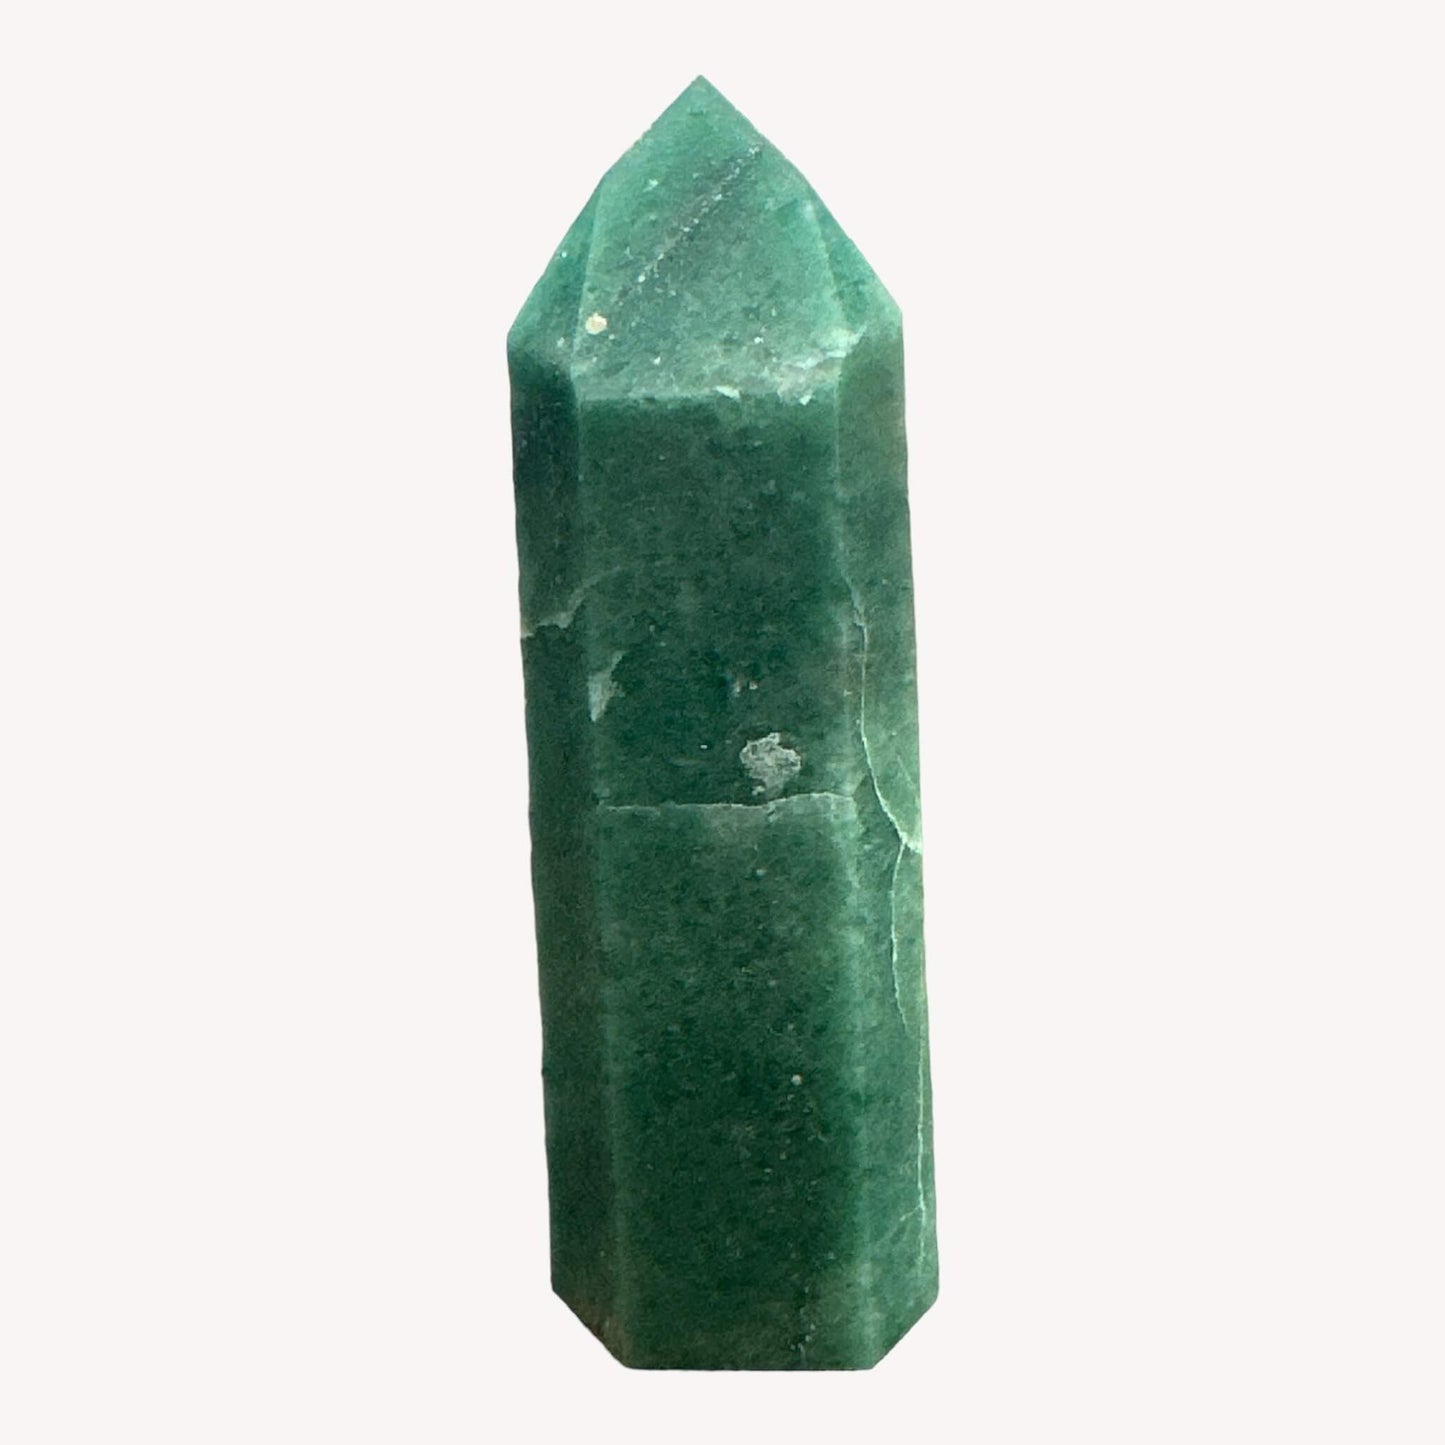 Aventurine crystal generator displaying its radiant green tones. The front view showcases the polished surface, revealing the natural sparkles and soothing energy of this beautiful crystal.